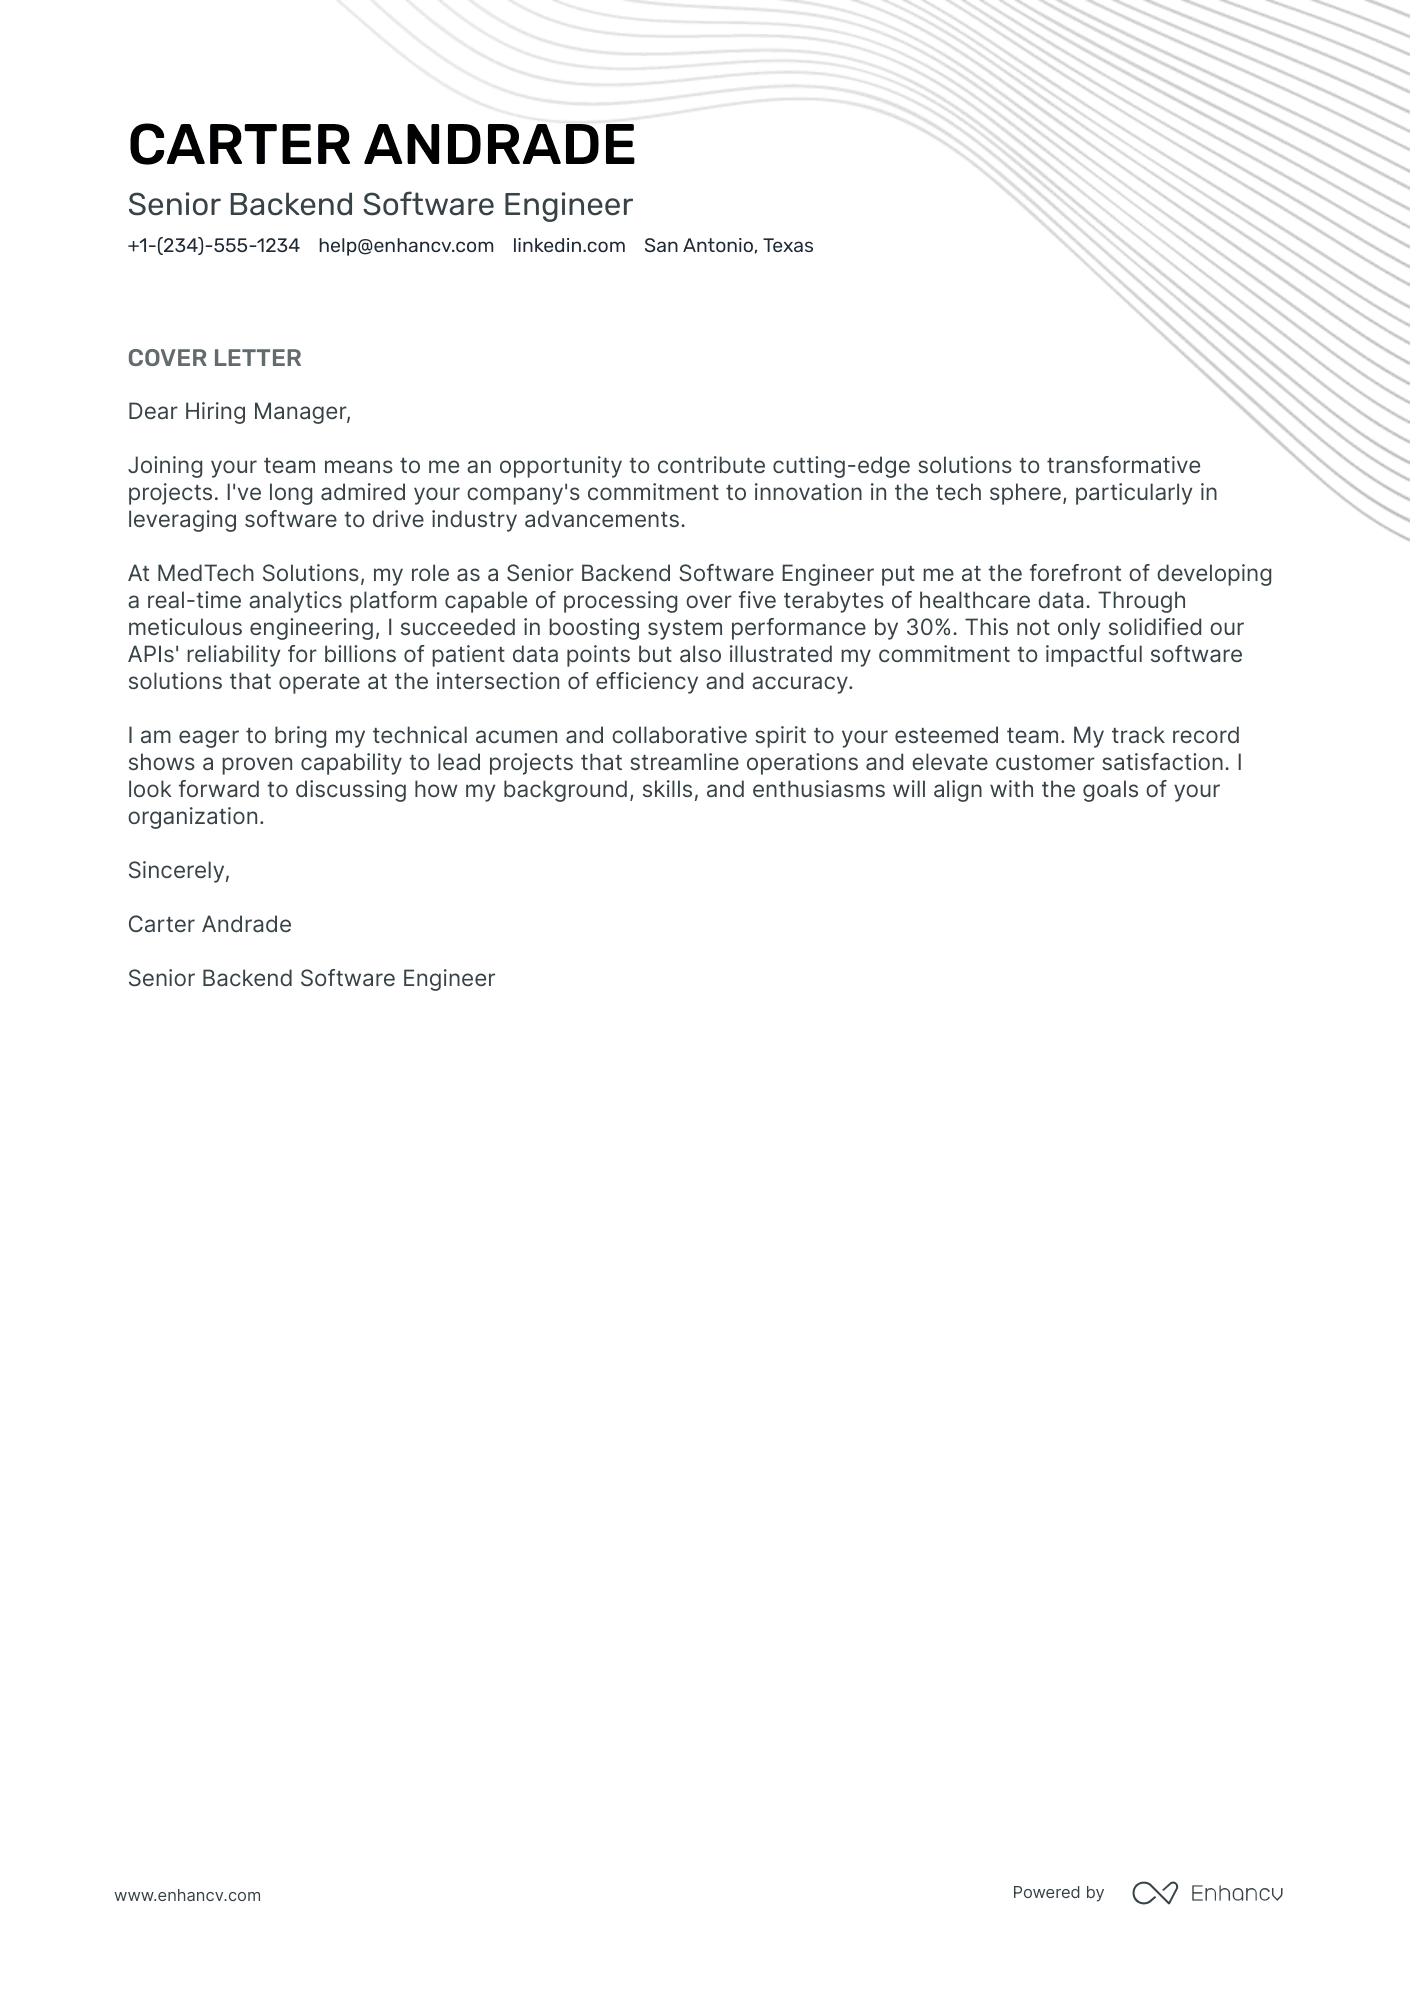 Reliability Engineer cover letter